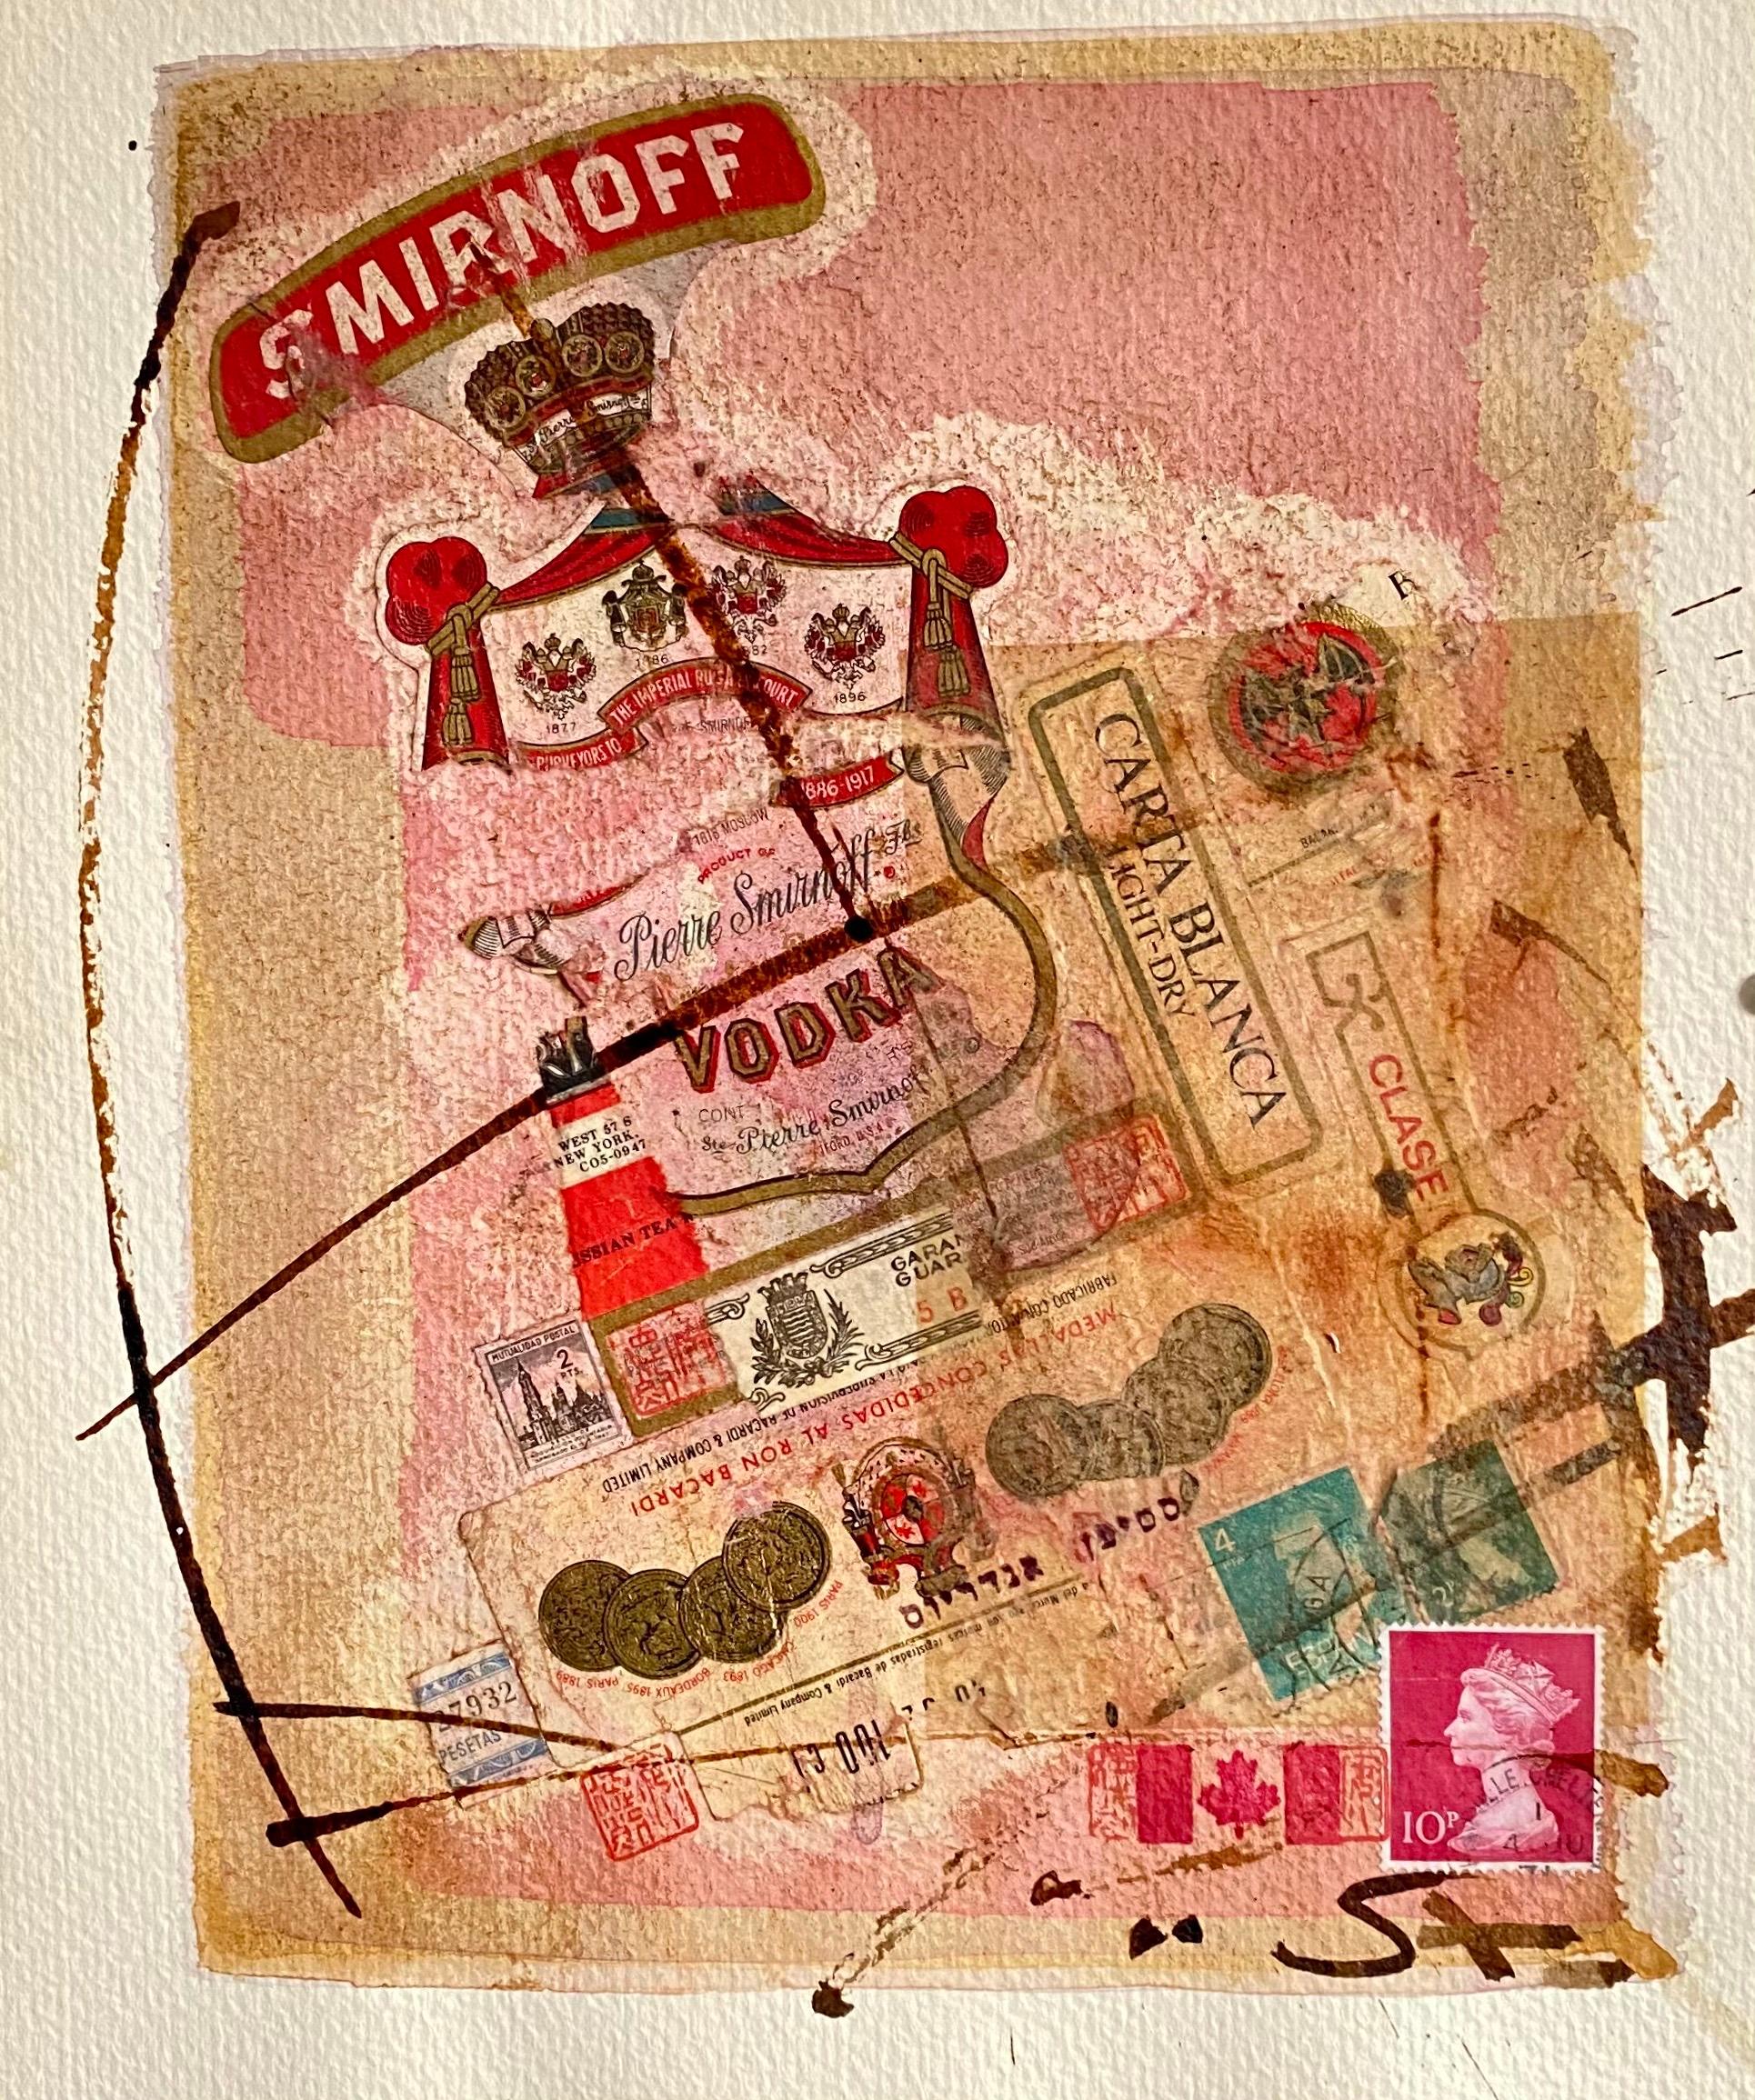 Stephen Andrews Abstract Drawing - Canadian Art MIxed Media Collage Assemblage Painting Hebrew Stamp Smirnoff Vodka